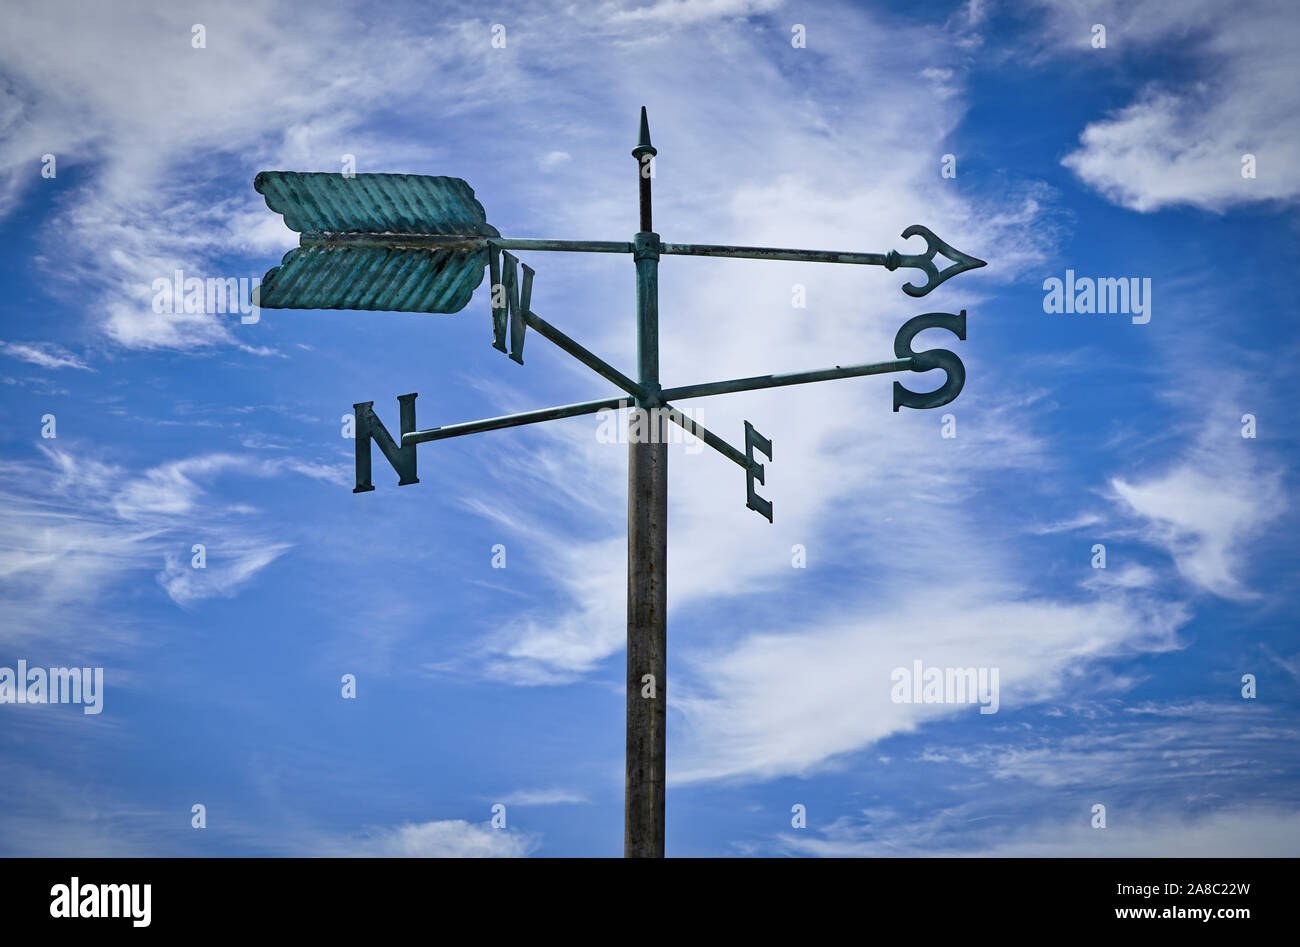 weather vanes with letters indicating the points of the compass Stock Photo